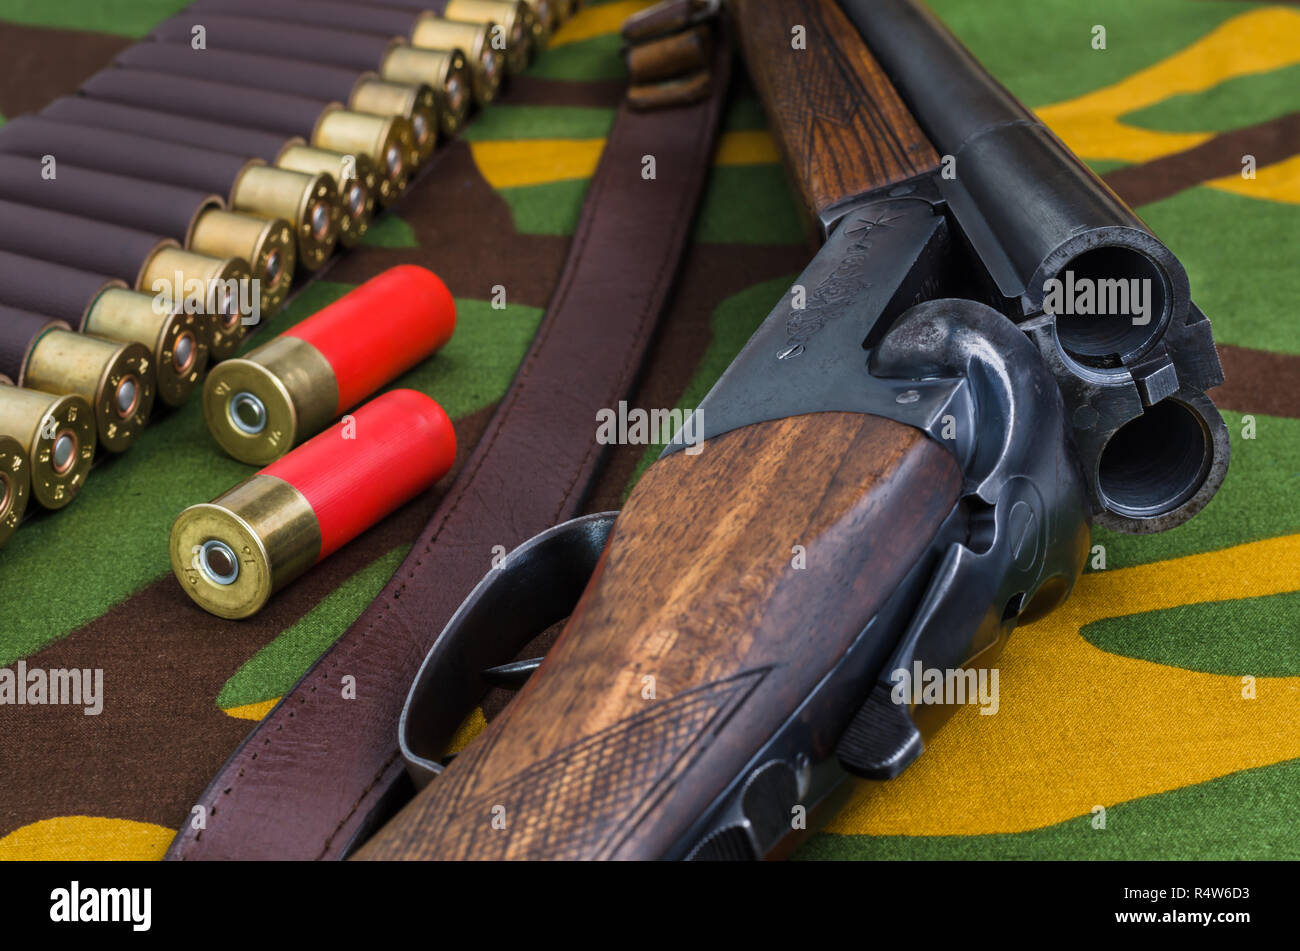 Hunting rifle and ammunition on a camouflage background. Stock Photo